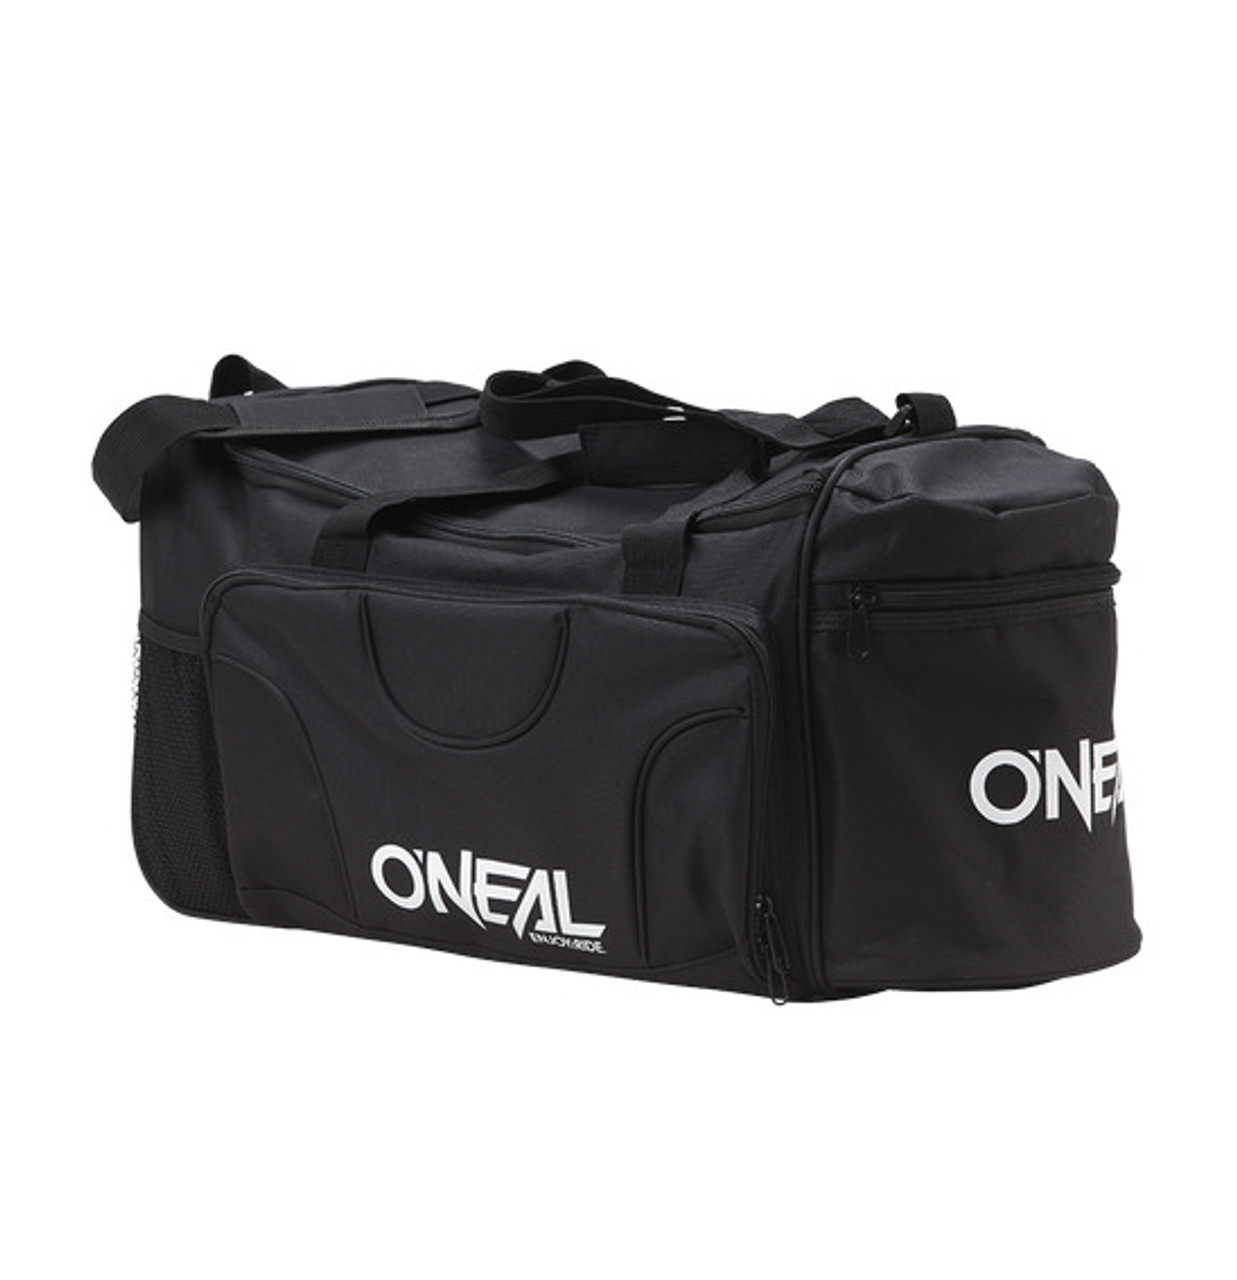 O'Neal Gear bag available for sale now #lamotopowersports